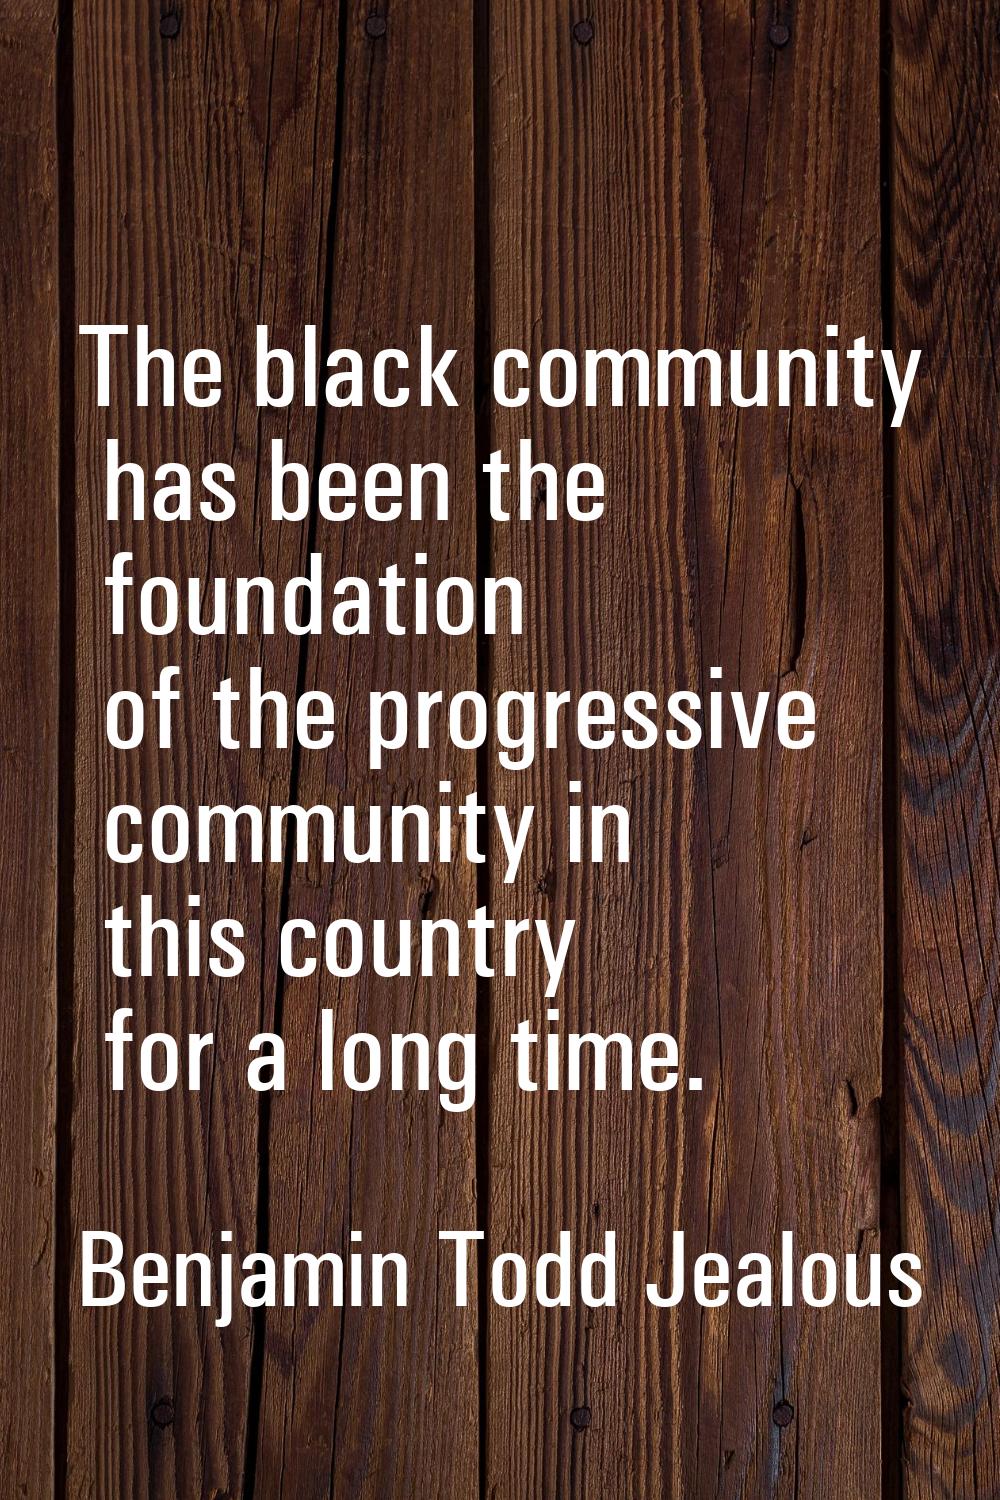 The black community has been the foundation of the progressive community in this country for a long